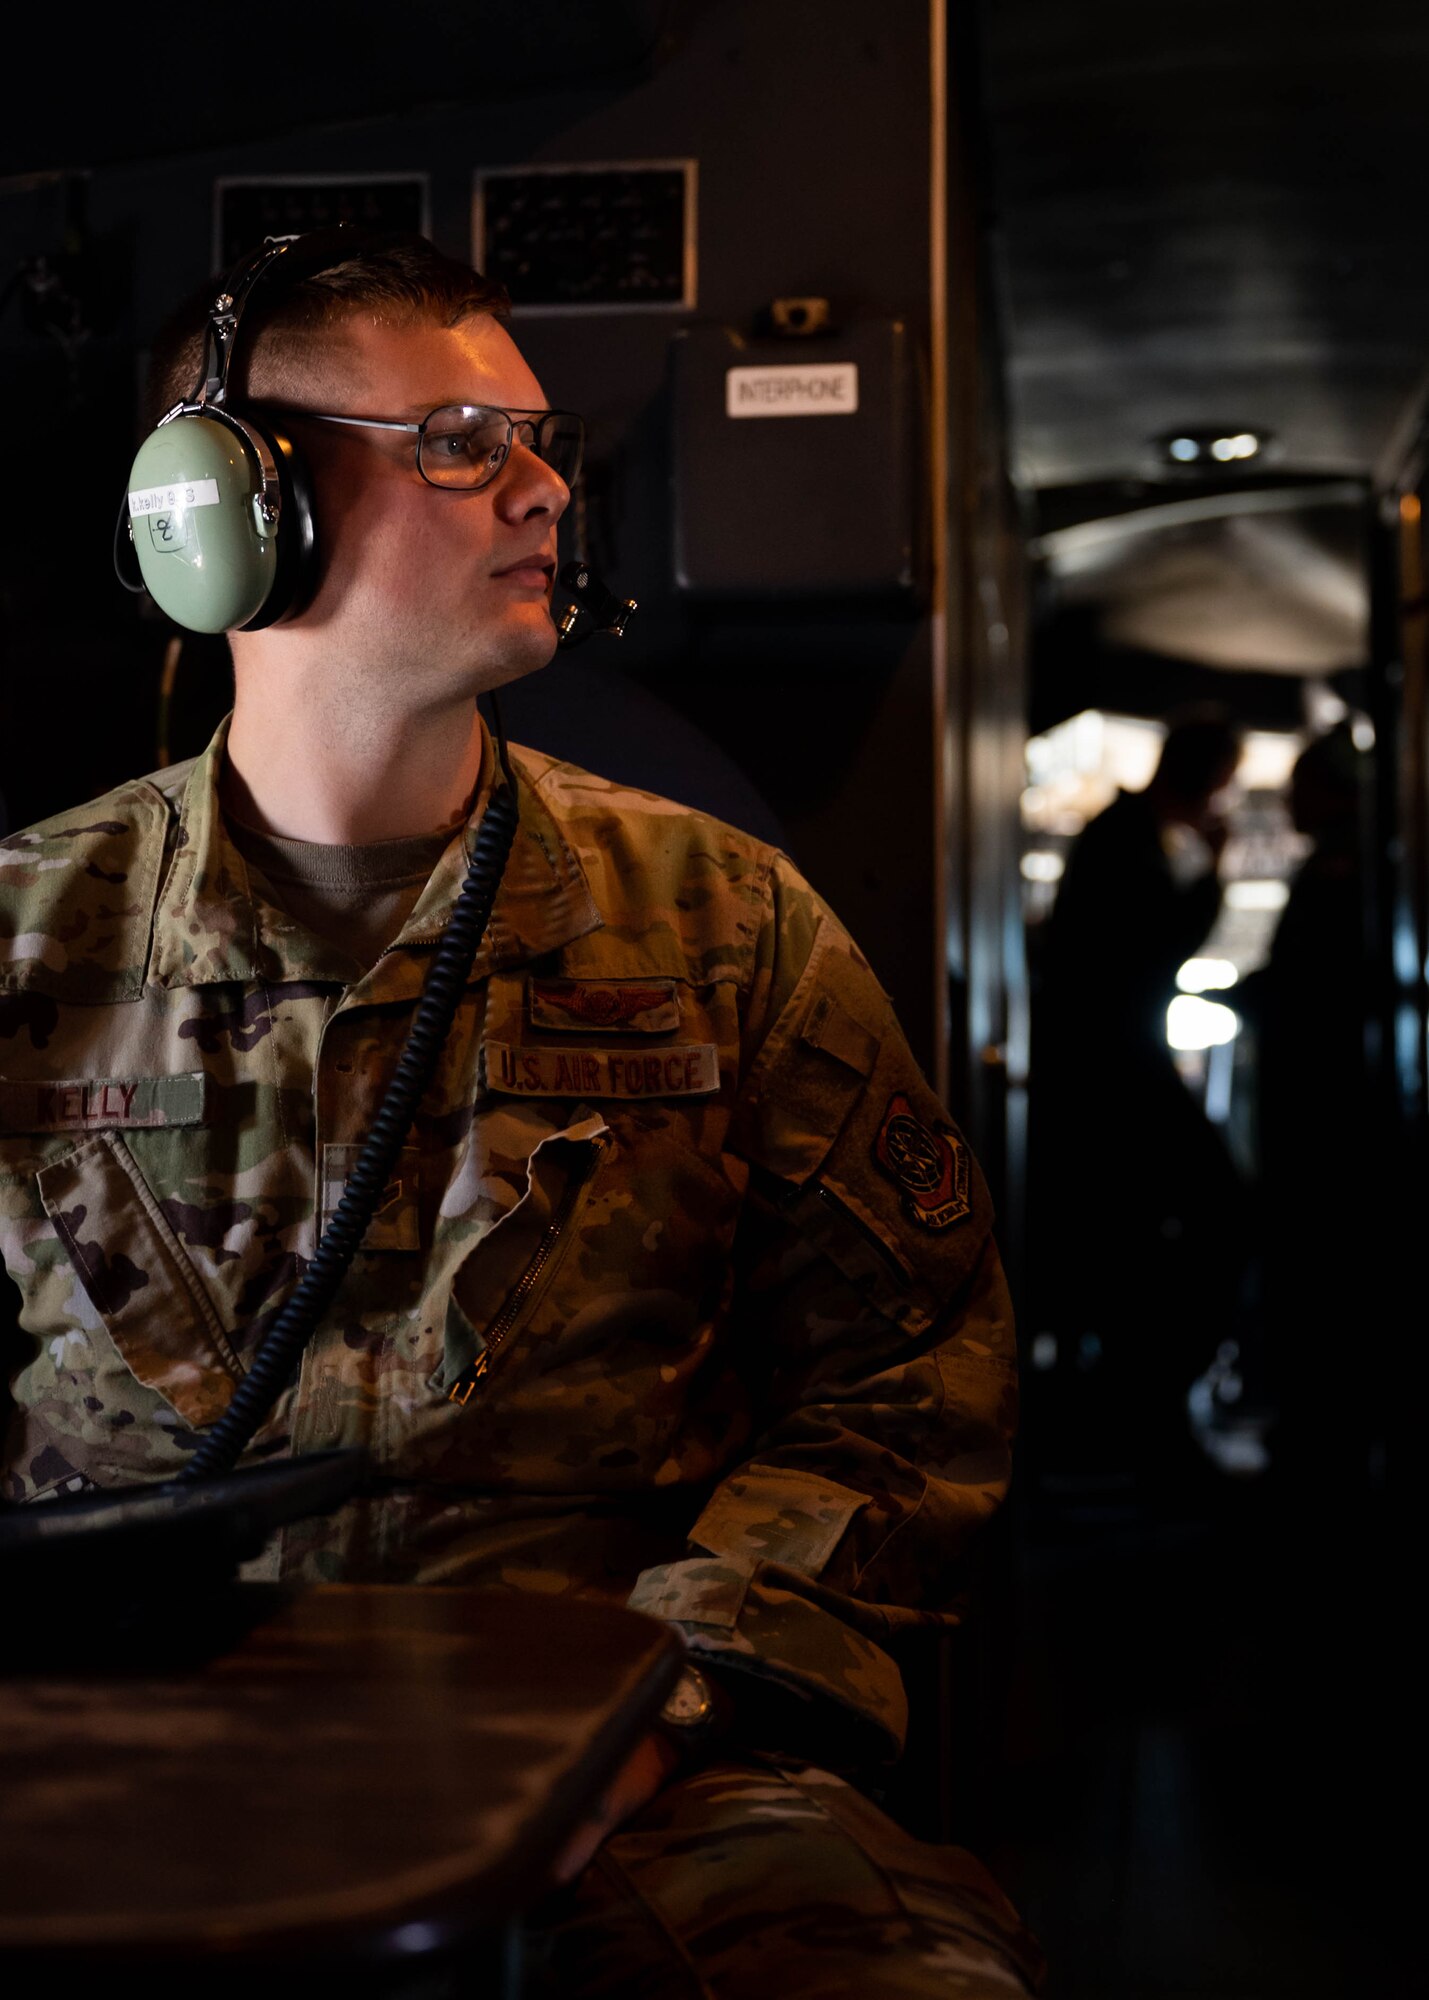 Airman 1st Class Kristopher Kelly, 9th Airlift Squadron loadmaster, sits at the working table aboard a C-5M Super Galaxy during a local training flight over New York, June 23, 2021. The 9th AS routinely trains to provide global reach with unique outsized and oversized airlift capabilities on the C-5. (U.S. Air Force photo by Senior Airman Faith Schaefer)